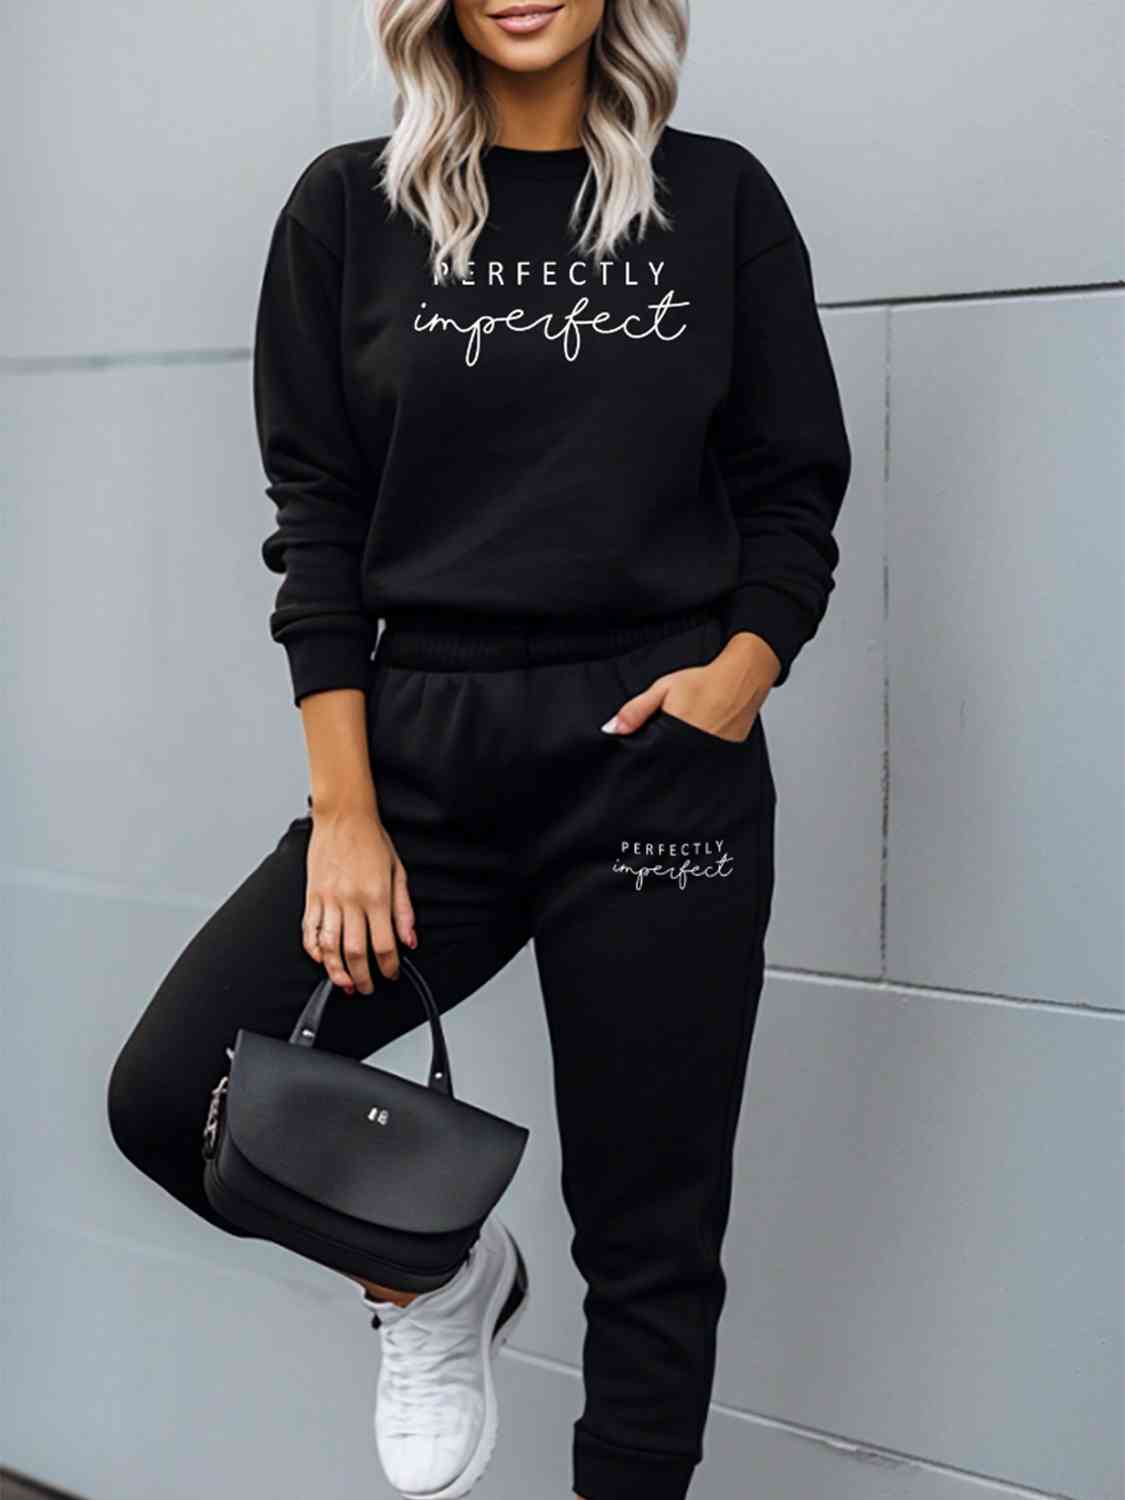 PERFECTLY IMPERFECT Graphic Sweatshirt and Sweatpants Set - Posh Country Lifestyle Marketplace